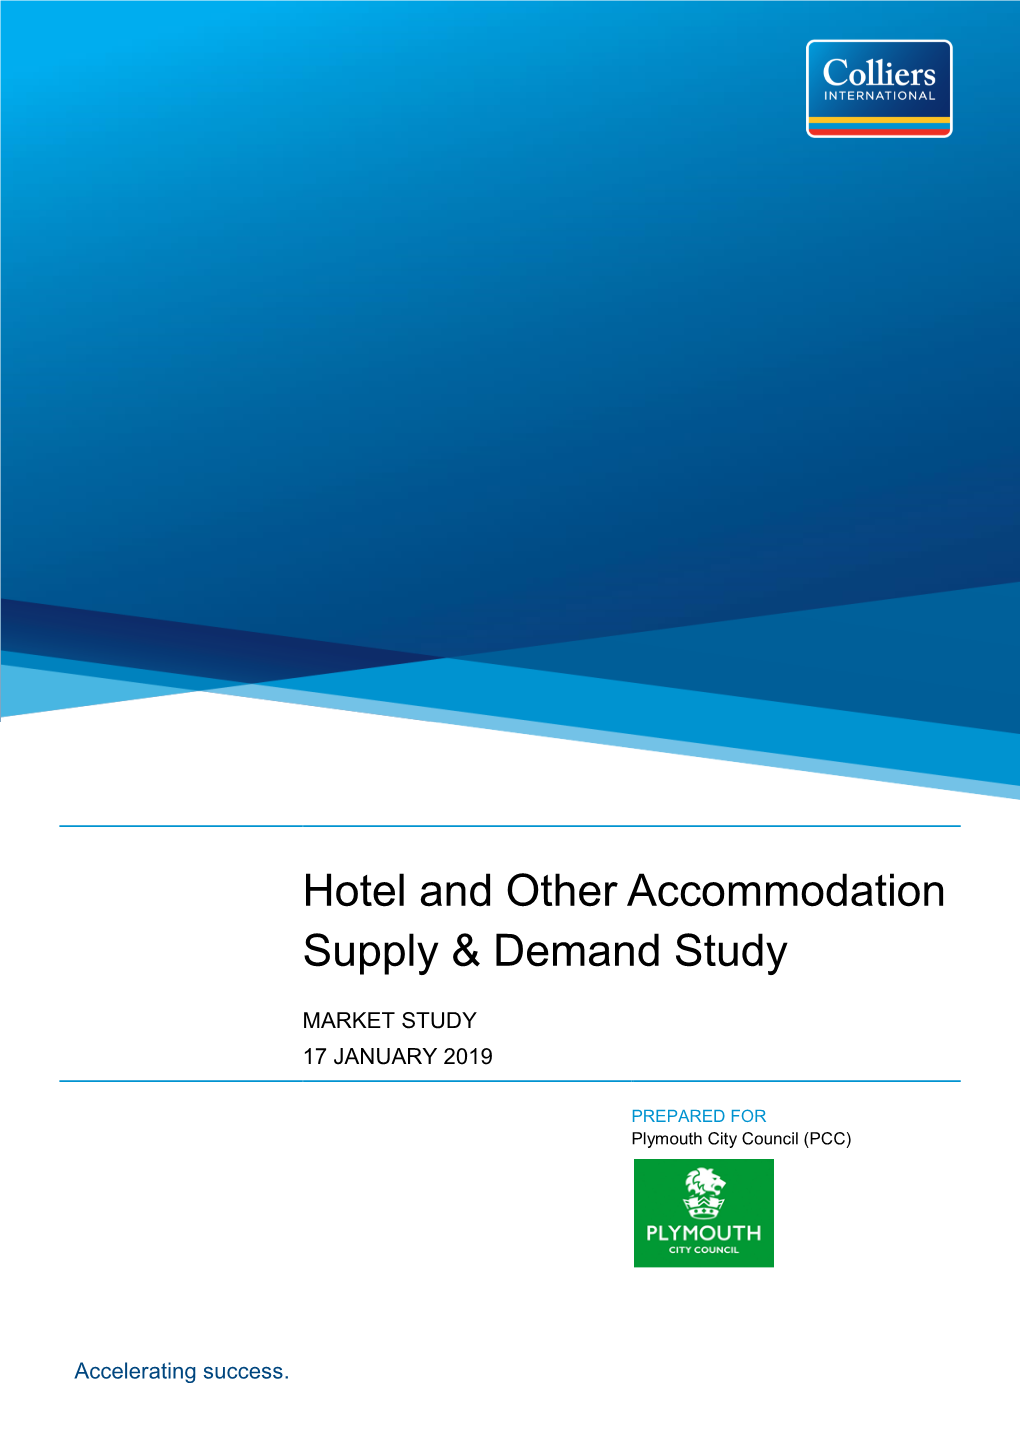 Hotel and Other Accommodation Supply & Demand